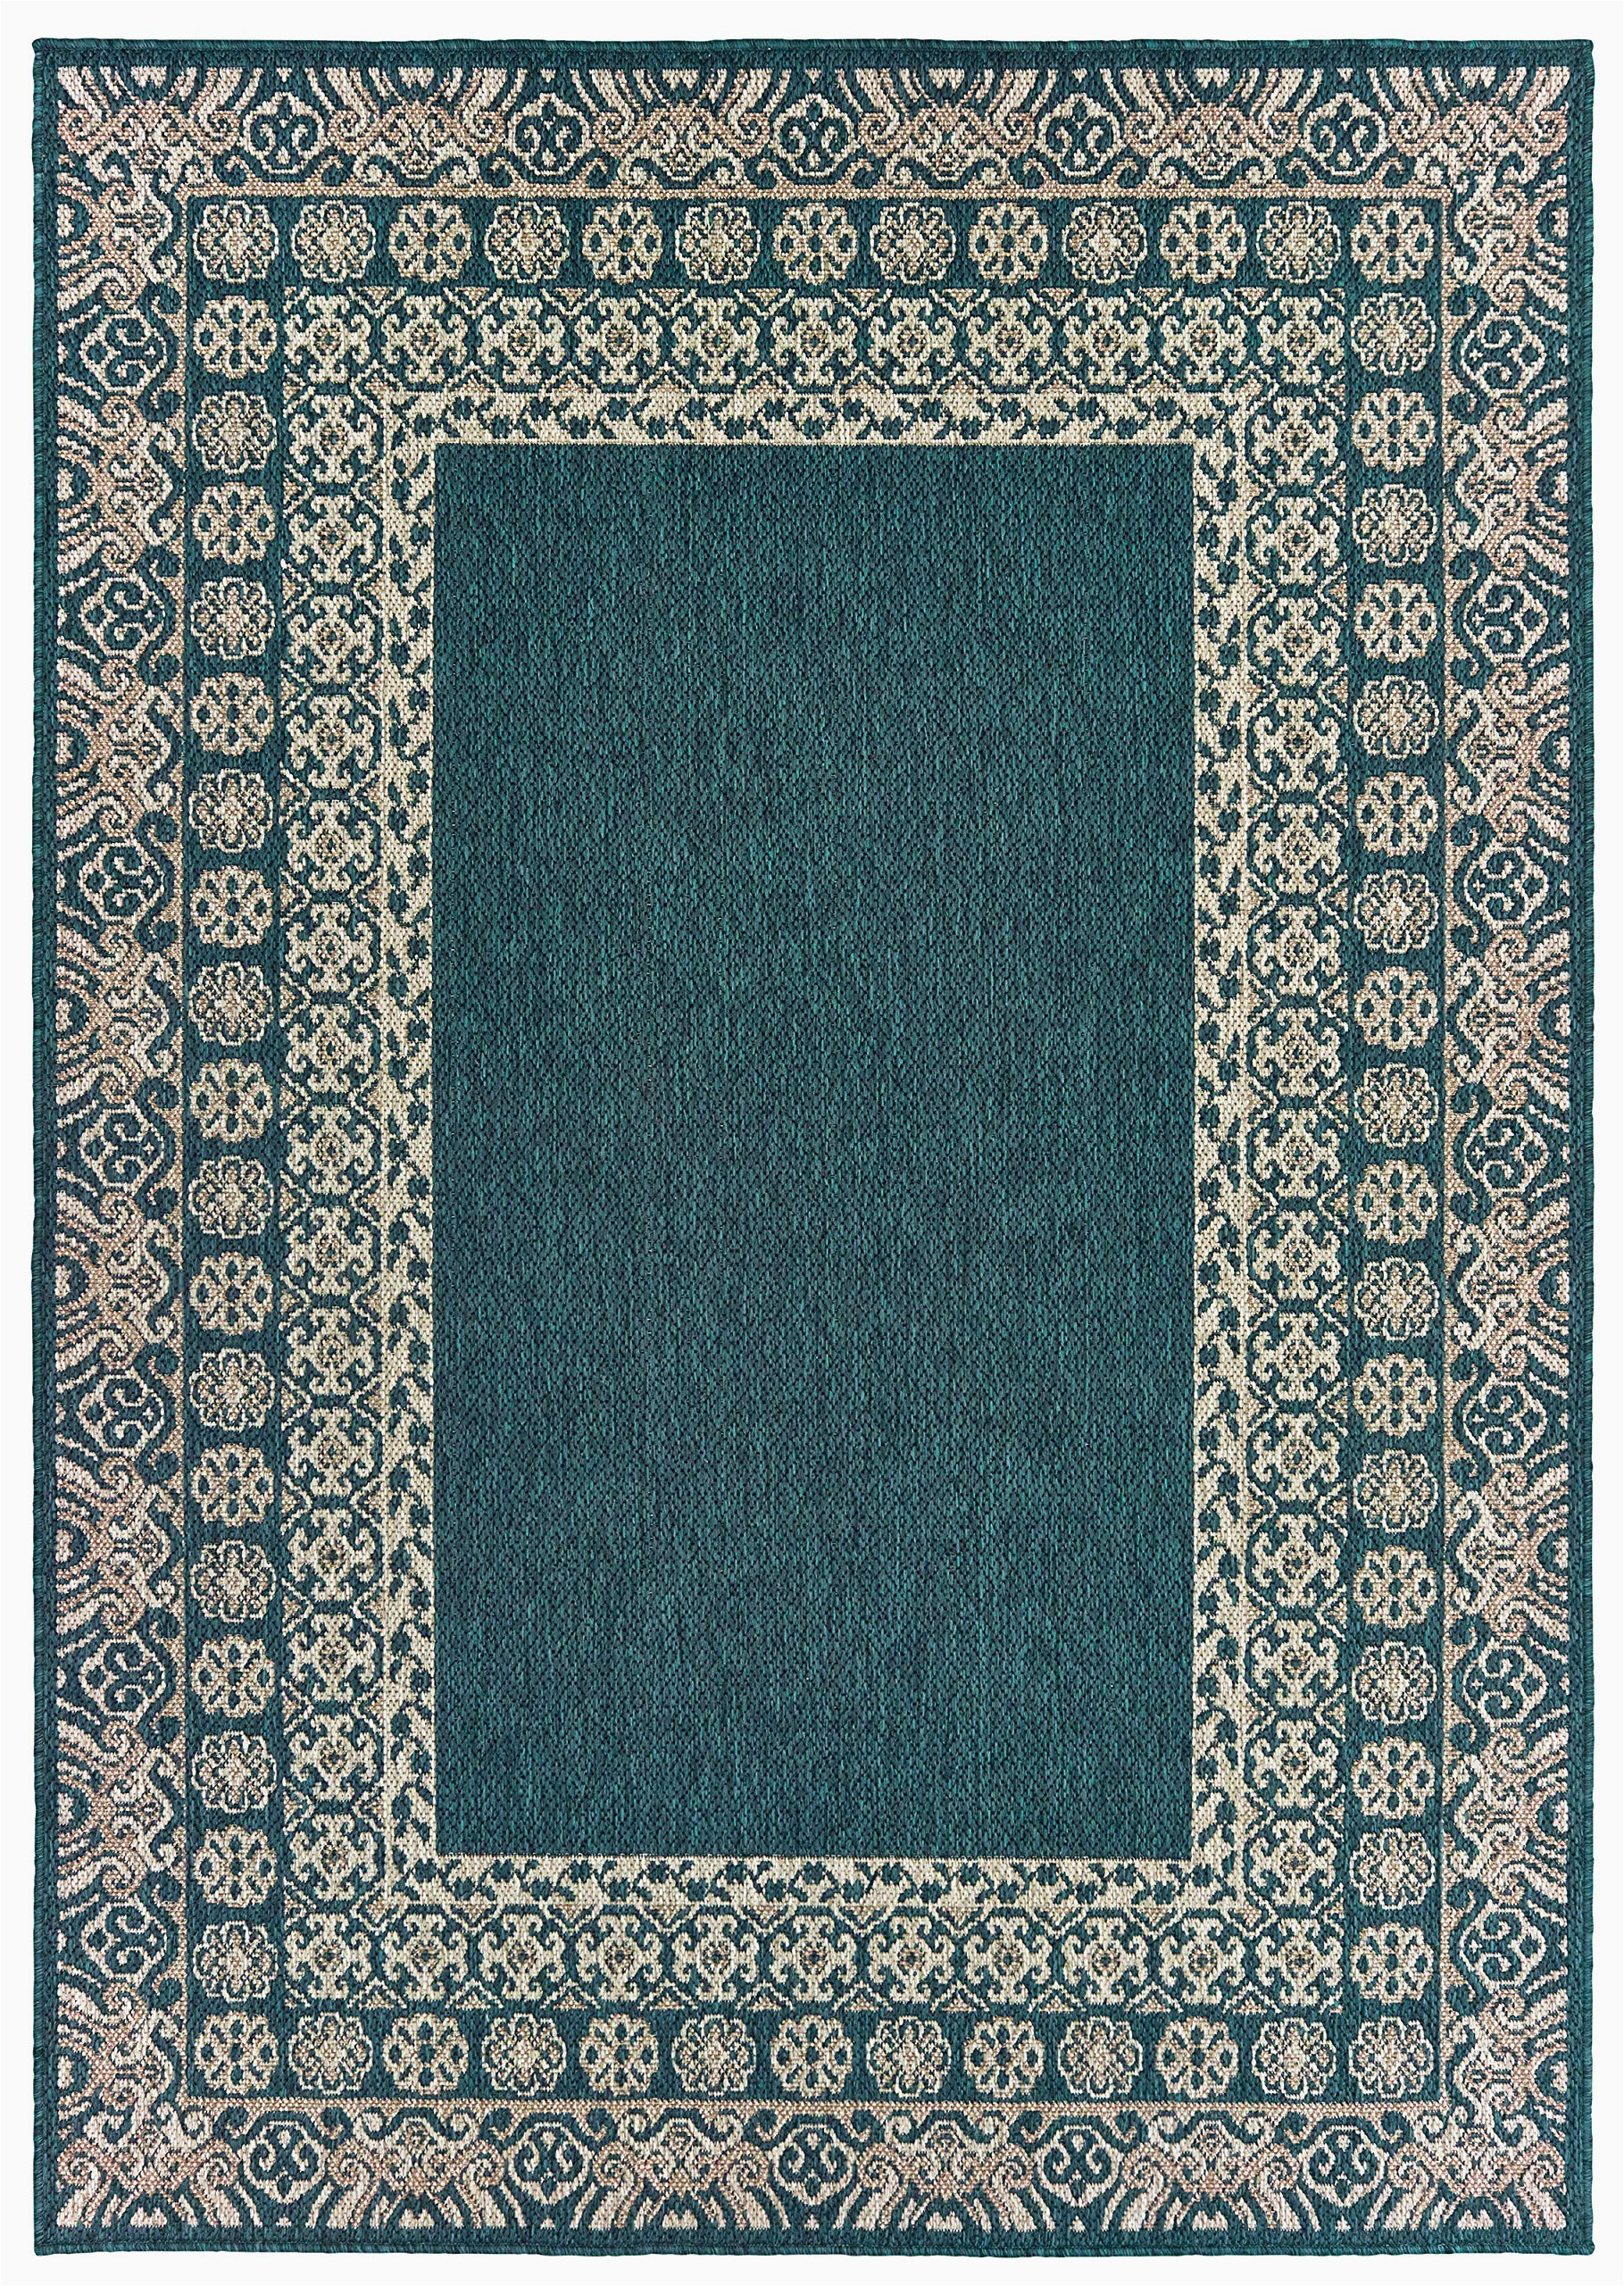 10ft by 10ft area Rug Amazon Living fort Fiji Fib3051 7ft 10in X 10ft Blue